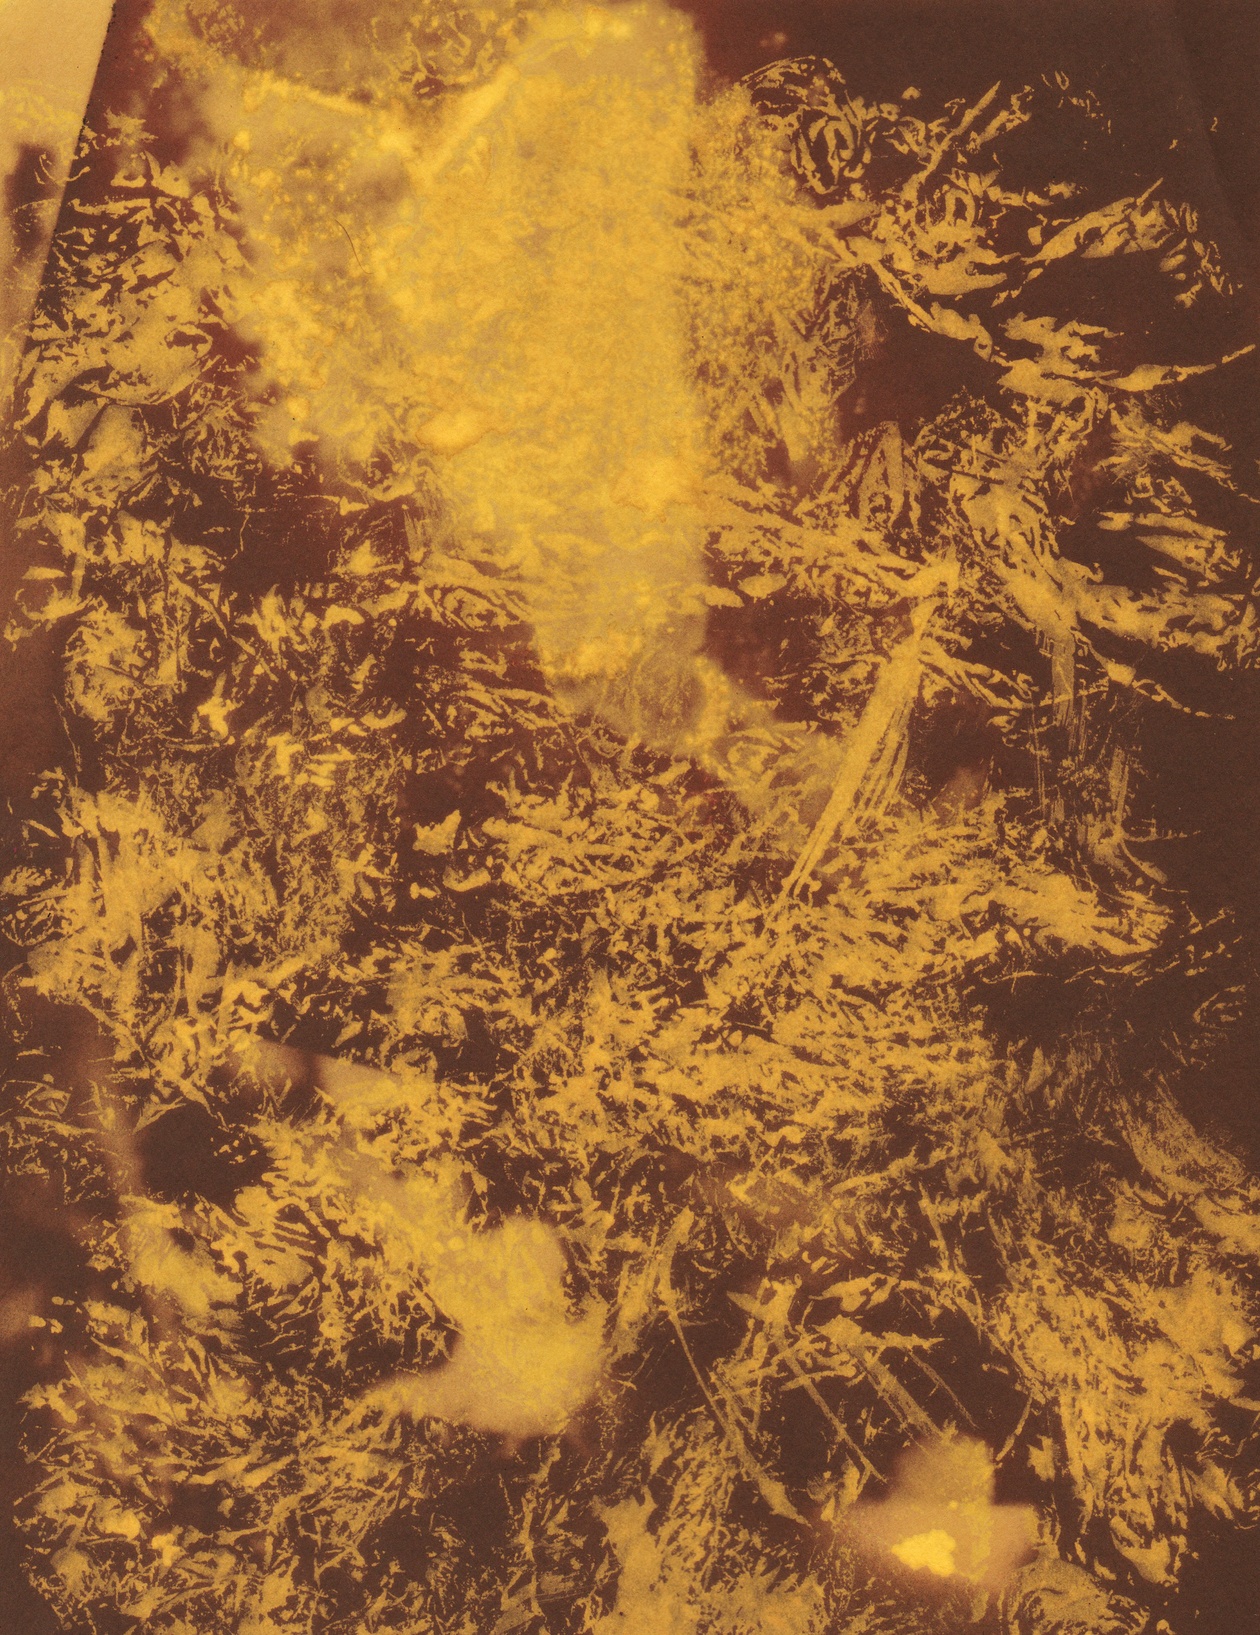 Bleached paper texture Photoshop brush